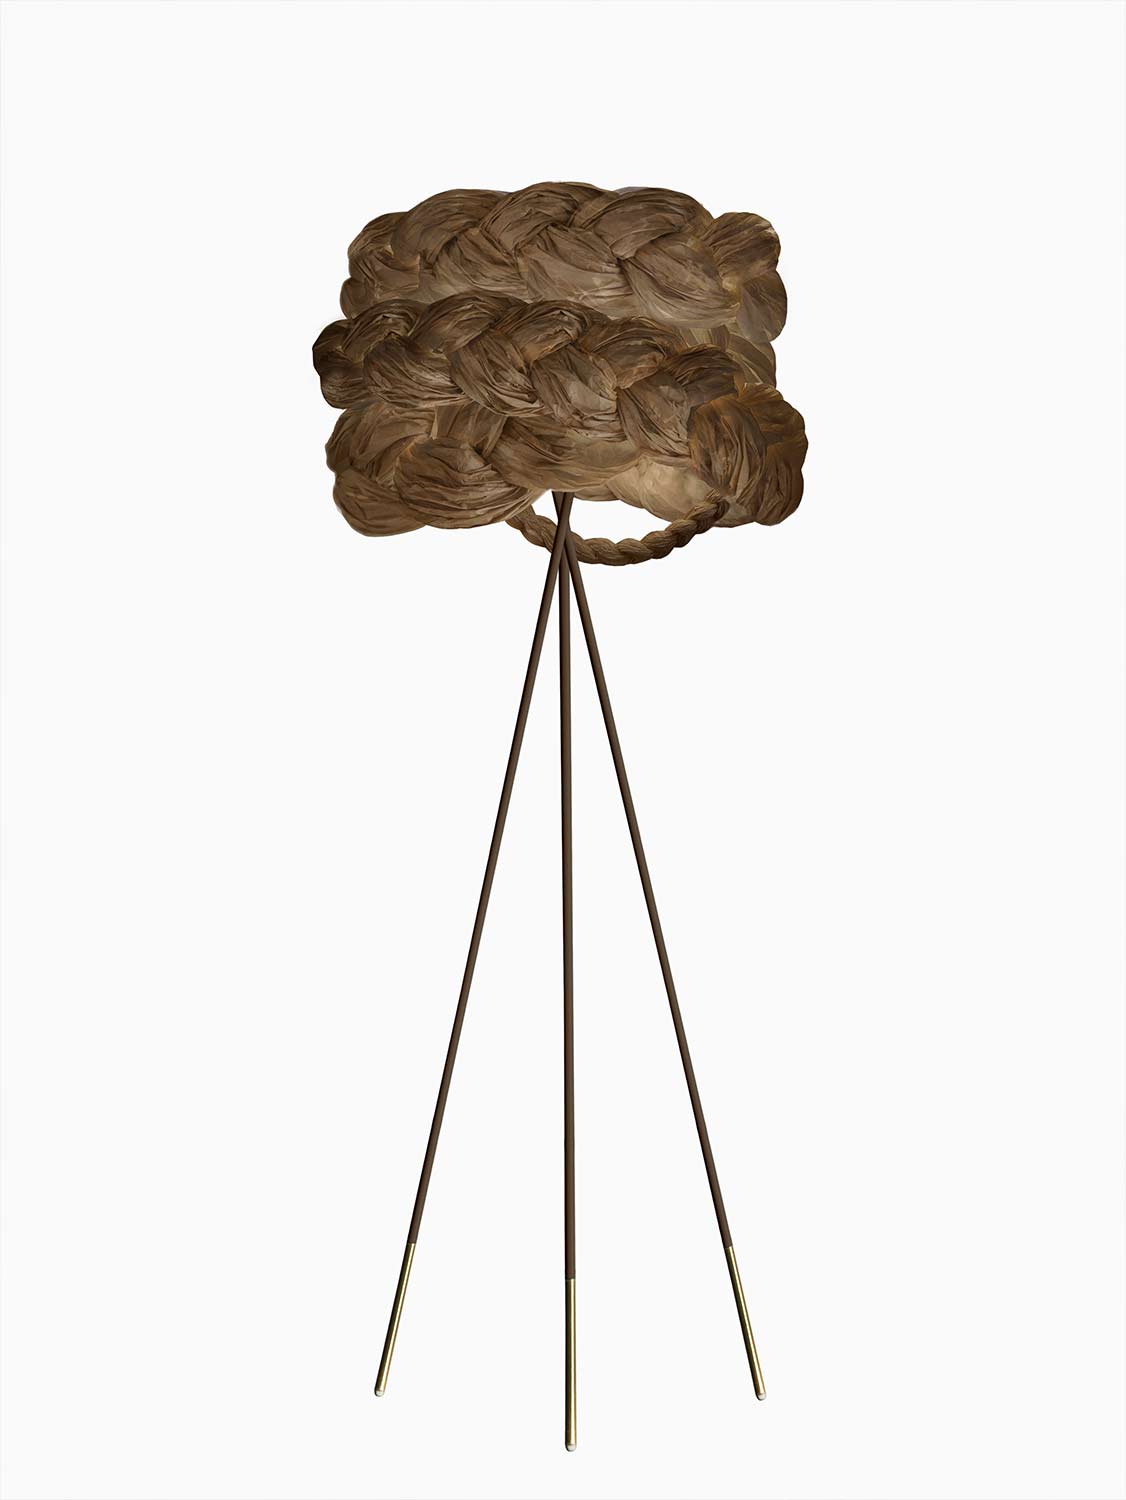 Brown Paper Braided Unique Handmade Floor  Lamp | Cozy Atmosphere Lighting | Contemporary Natural Lighting for Living room,  Bedroom & Lobby | Sustainable Design Lighting | baby & kids room lighting | Natural interior | mammalampa The Bride free-standing lamp M